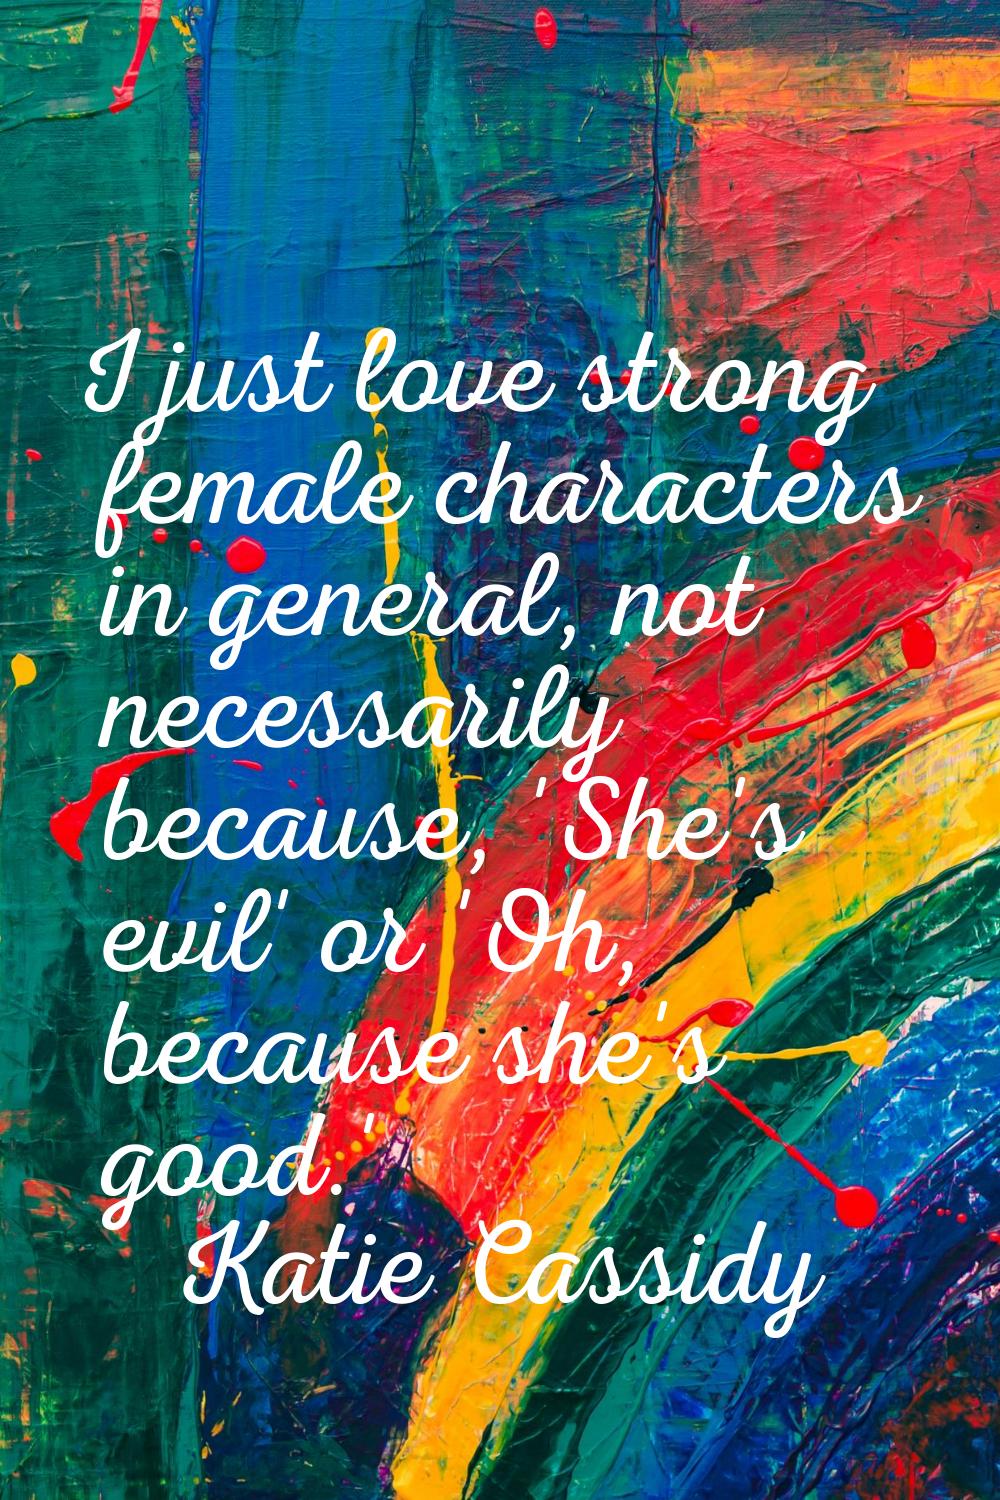 I just love strong female characters in general, not necessarily because, 'She's evil' or 'Oh, beca